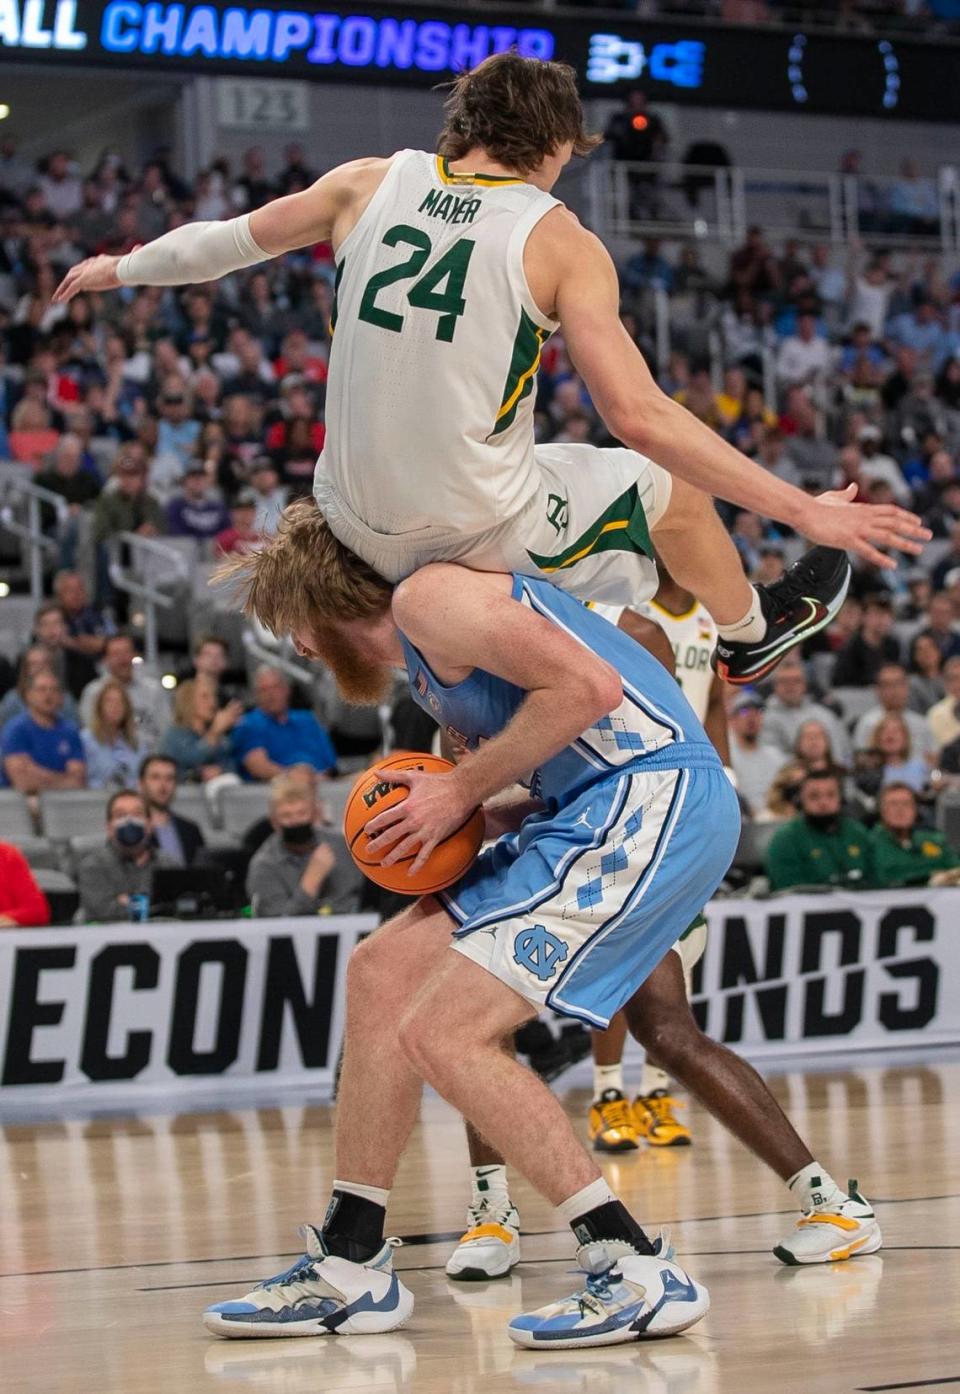 Baylors Matthew Mayer (24) lands in the back of North Carolinas Brady Manek (45) during the first half on Saturday, March 19, 2022 during the NCAA Tournament at Dickies Arena in Ft. Worth, TX.